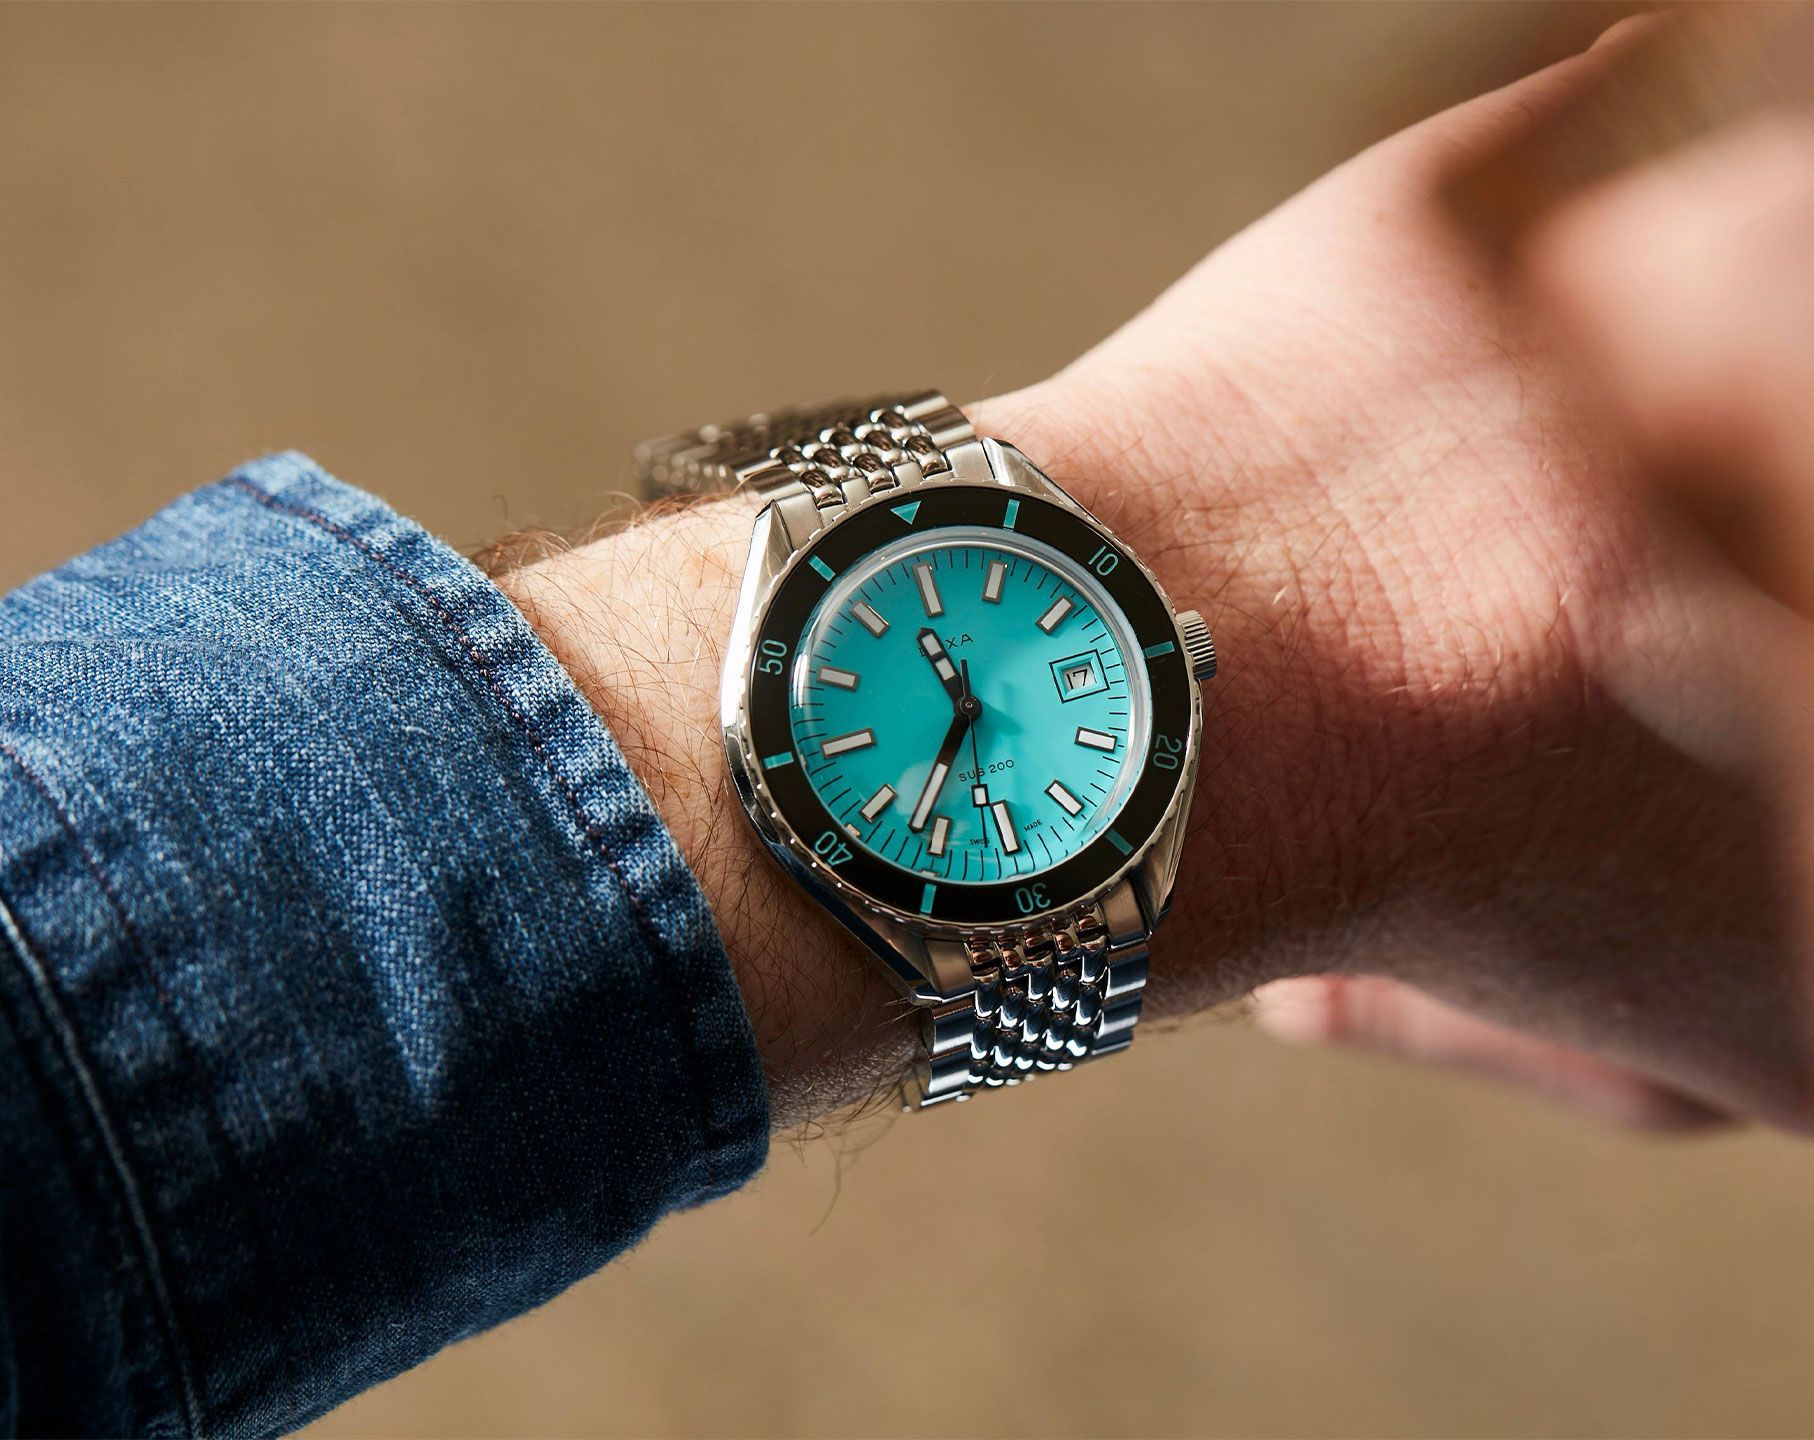 Doxa Aquamarine 42 mm Watch in Turquoise Dial For Men - 4